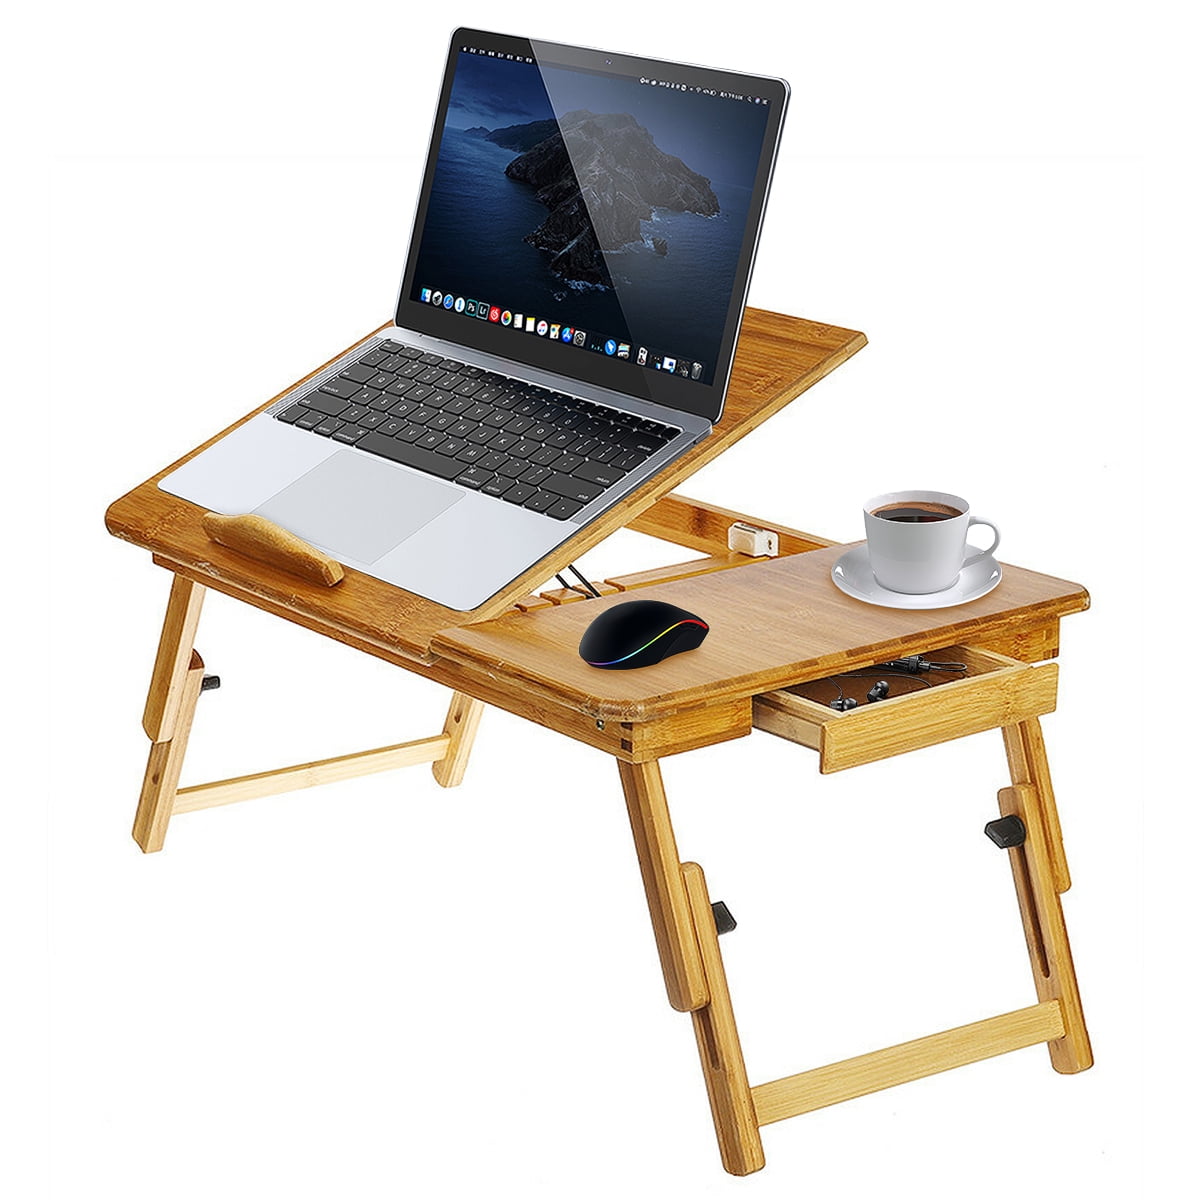 Folding exam classroom camping Laptop Coffee bistro market stall Table & chair 